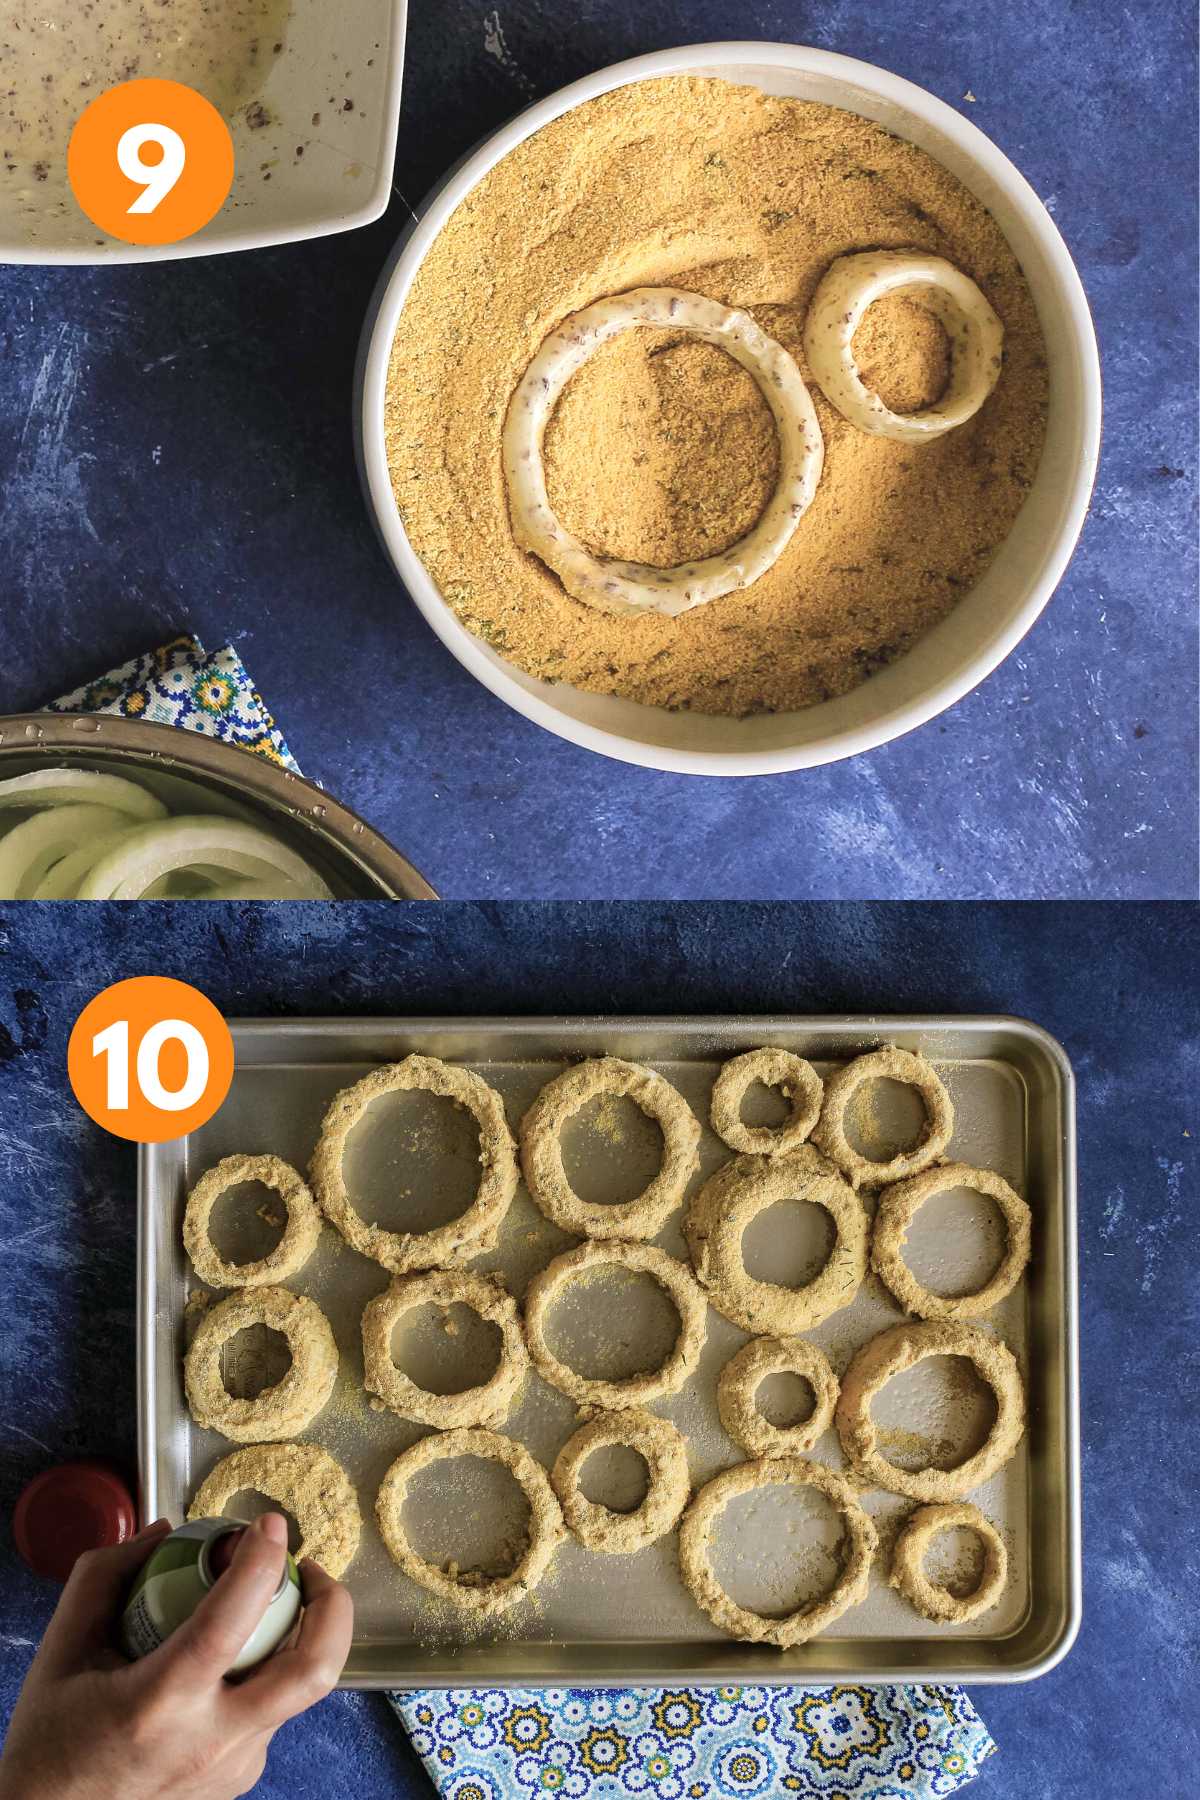 Onion rings in the cornmeal mixture on top and bottom image of breaded vegan onion rings on a baking tray.